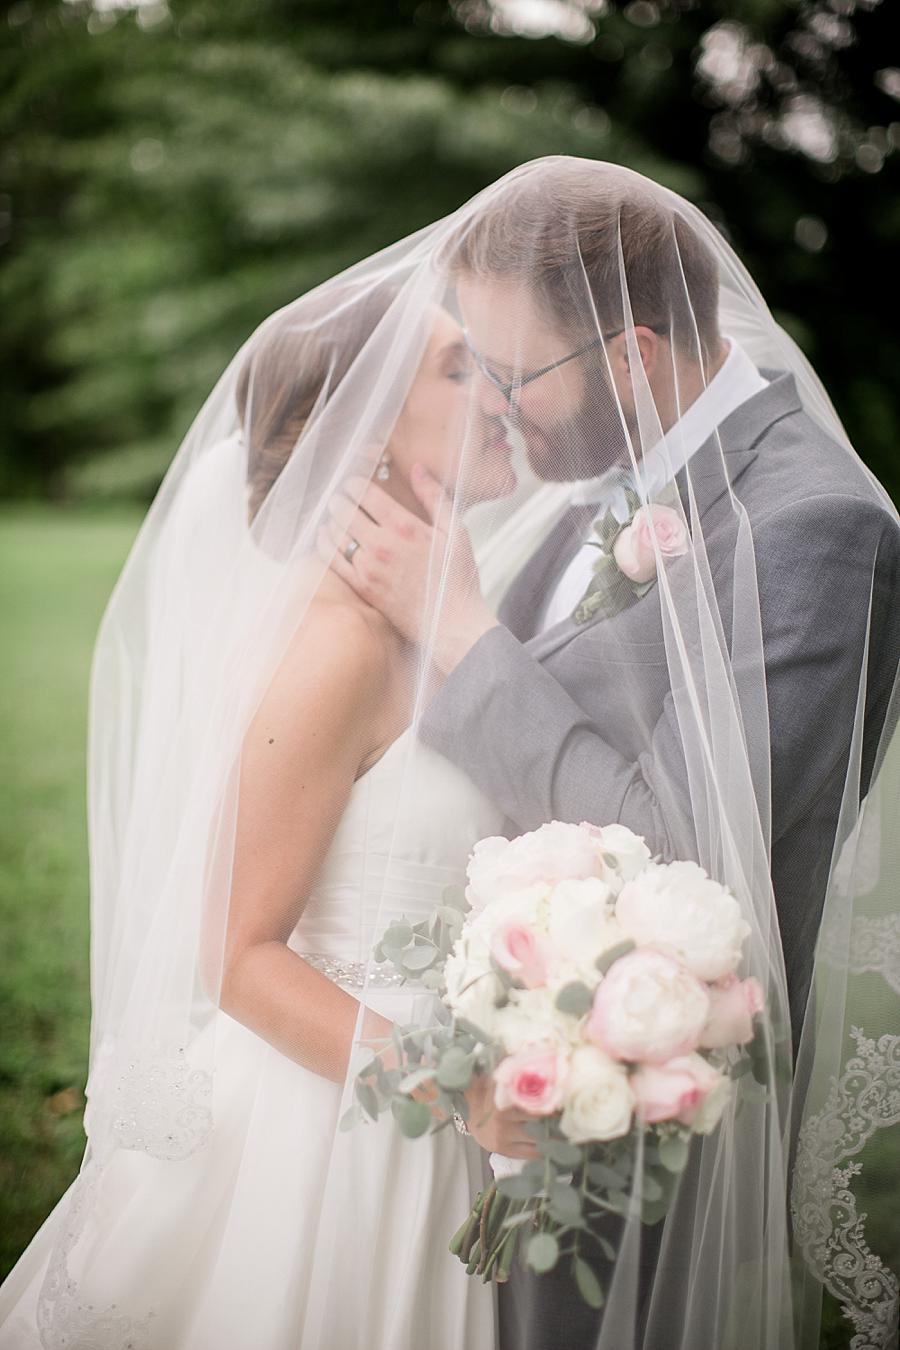 Under the veil at this Fountain City Church Wedding by Knoxville Wedding Photographer, Amanda May Photos.